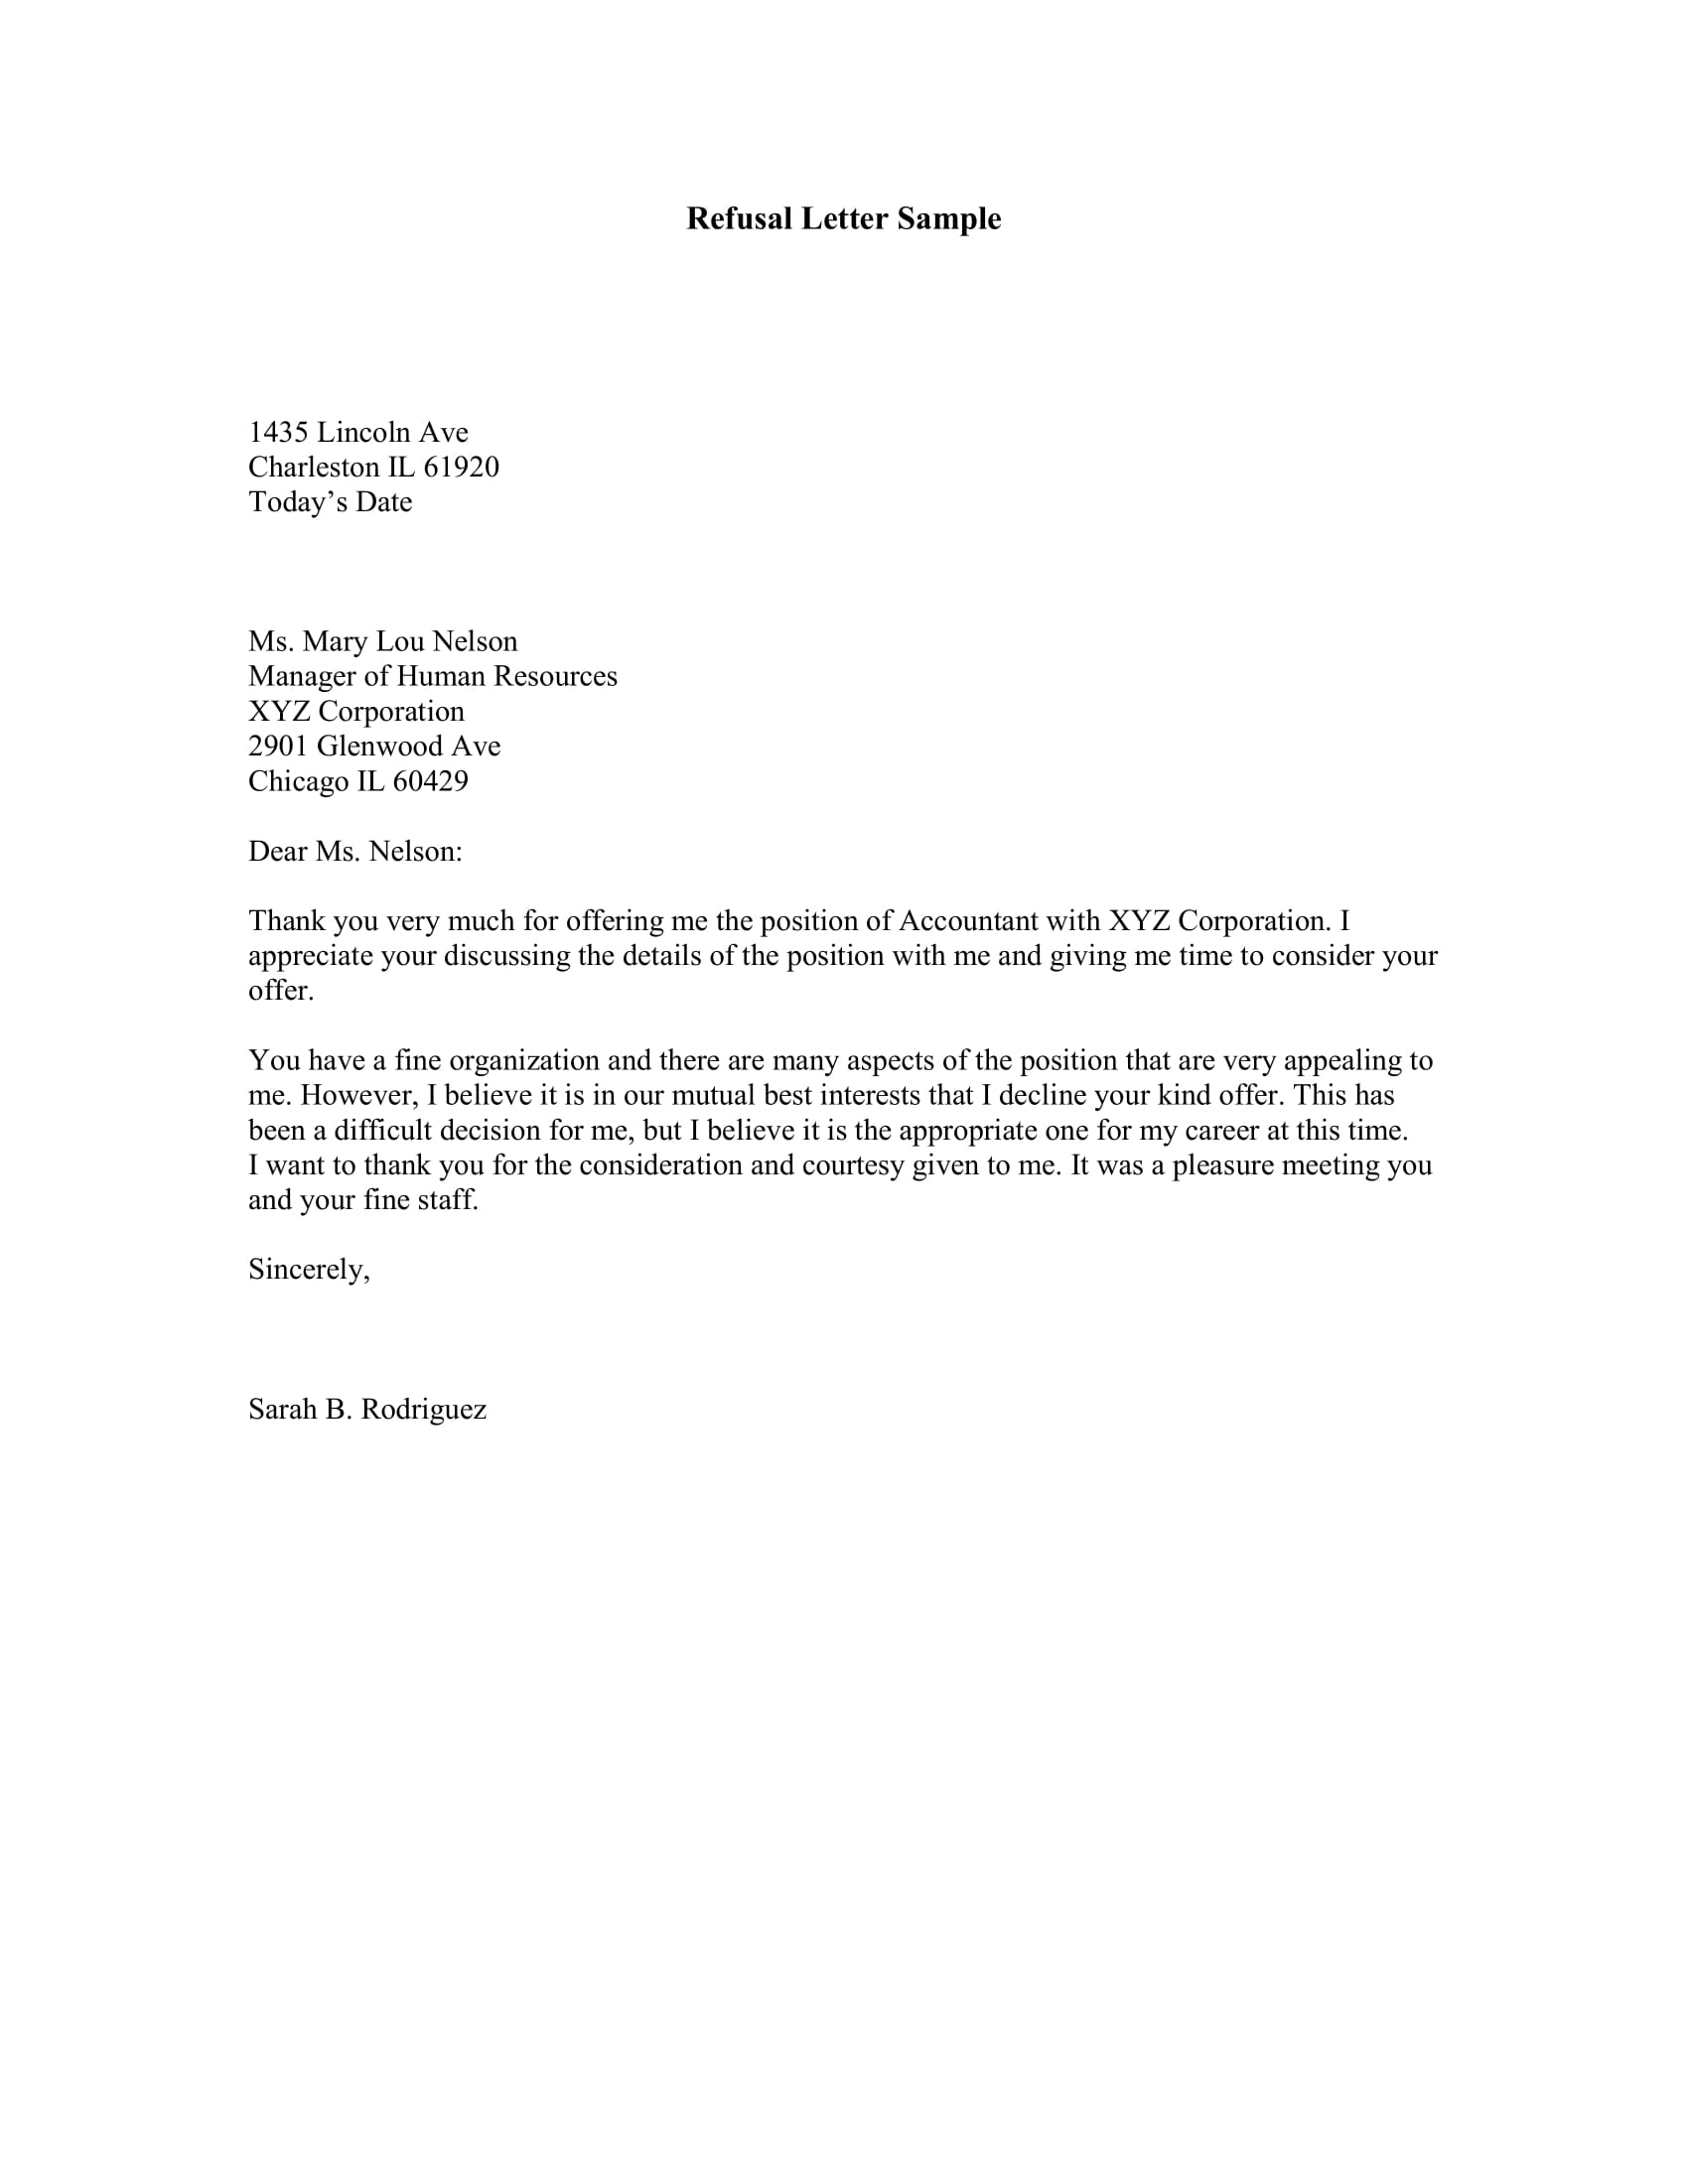 10+ Professional Letter Format Examples - PDF | Examples